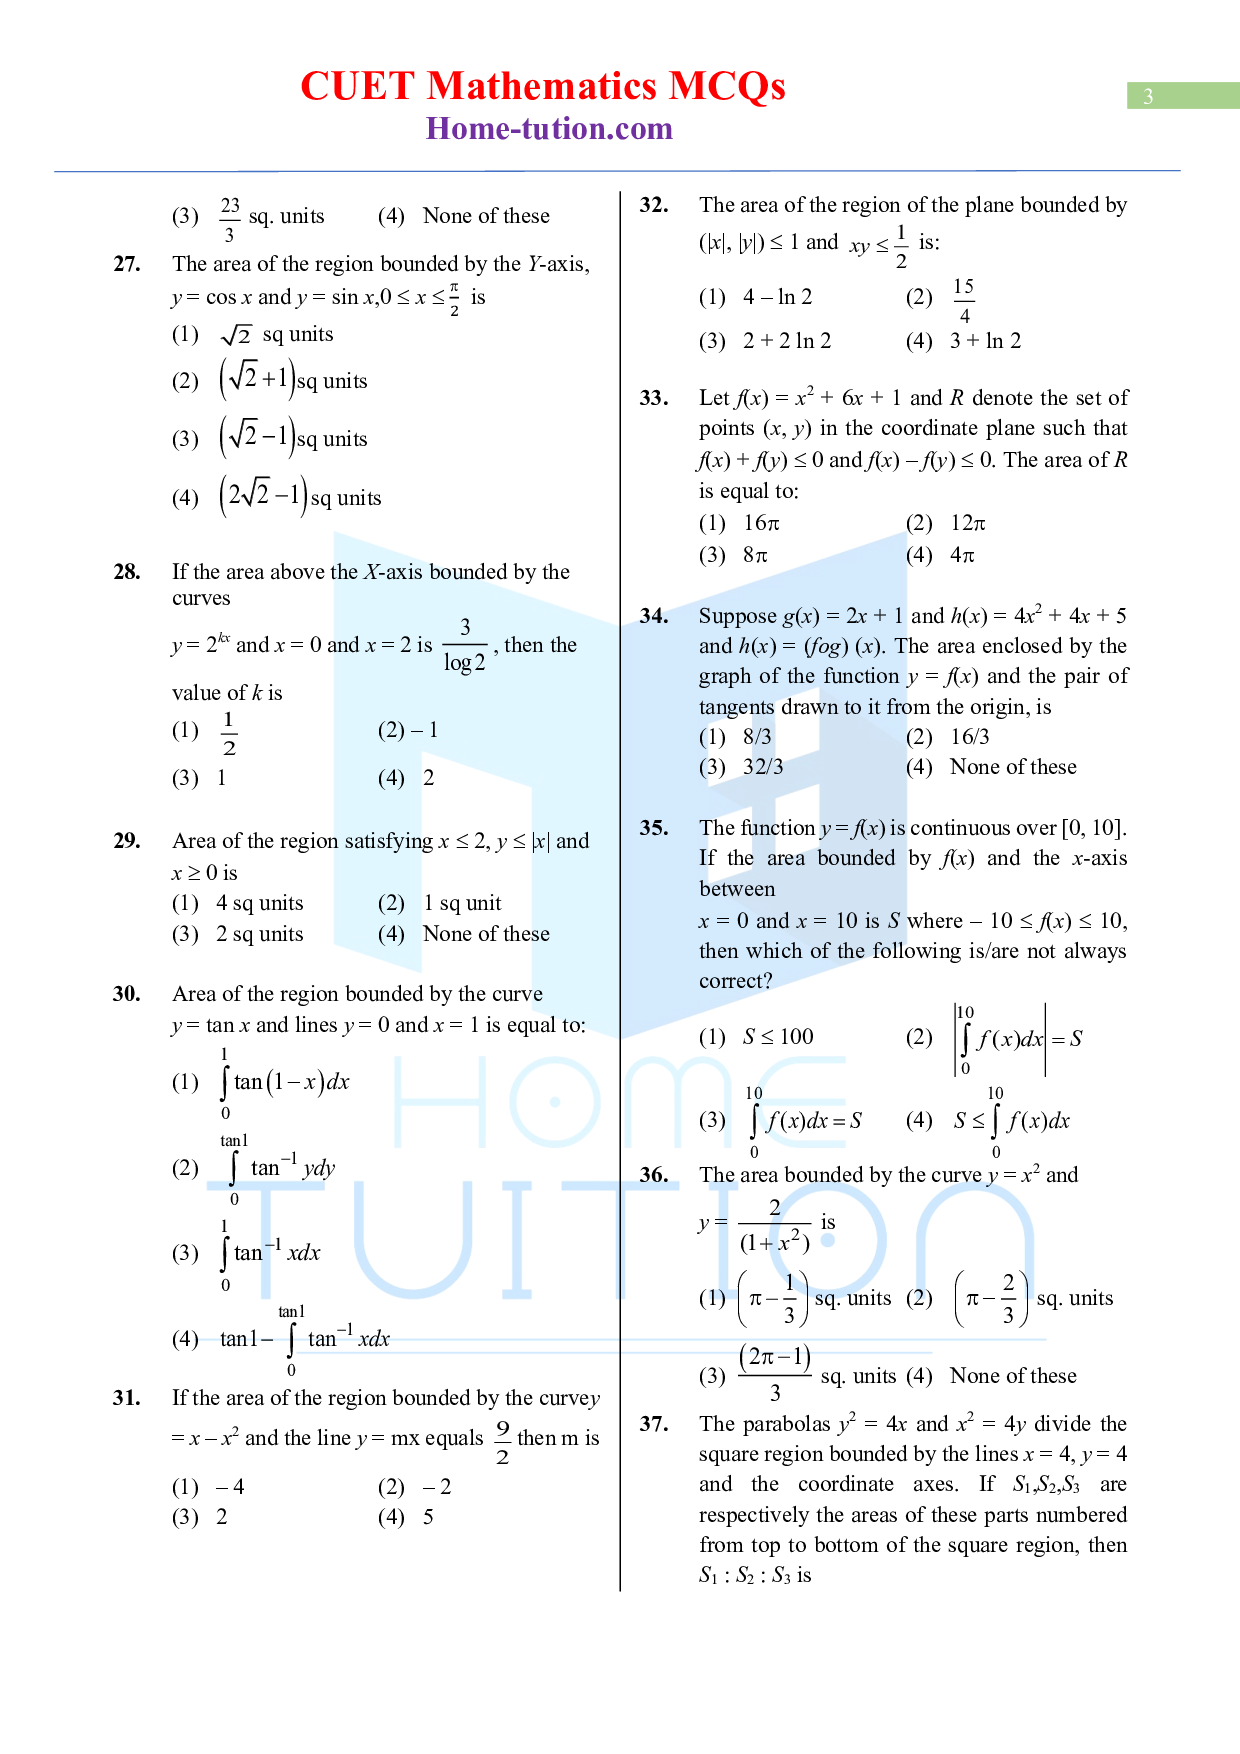 CUET MCQ Questions For Maths Chapter-2 Application of Integrals